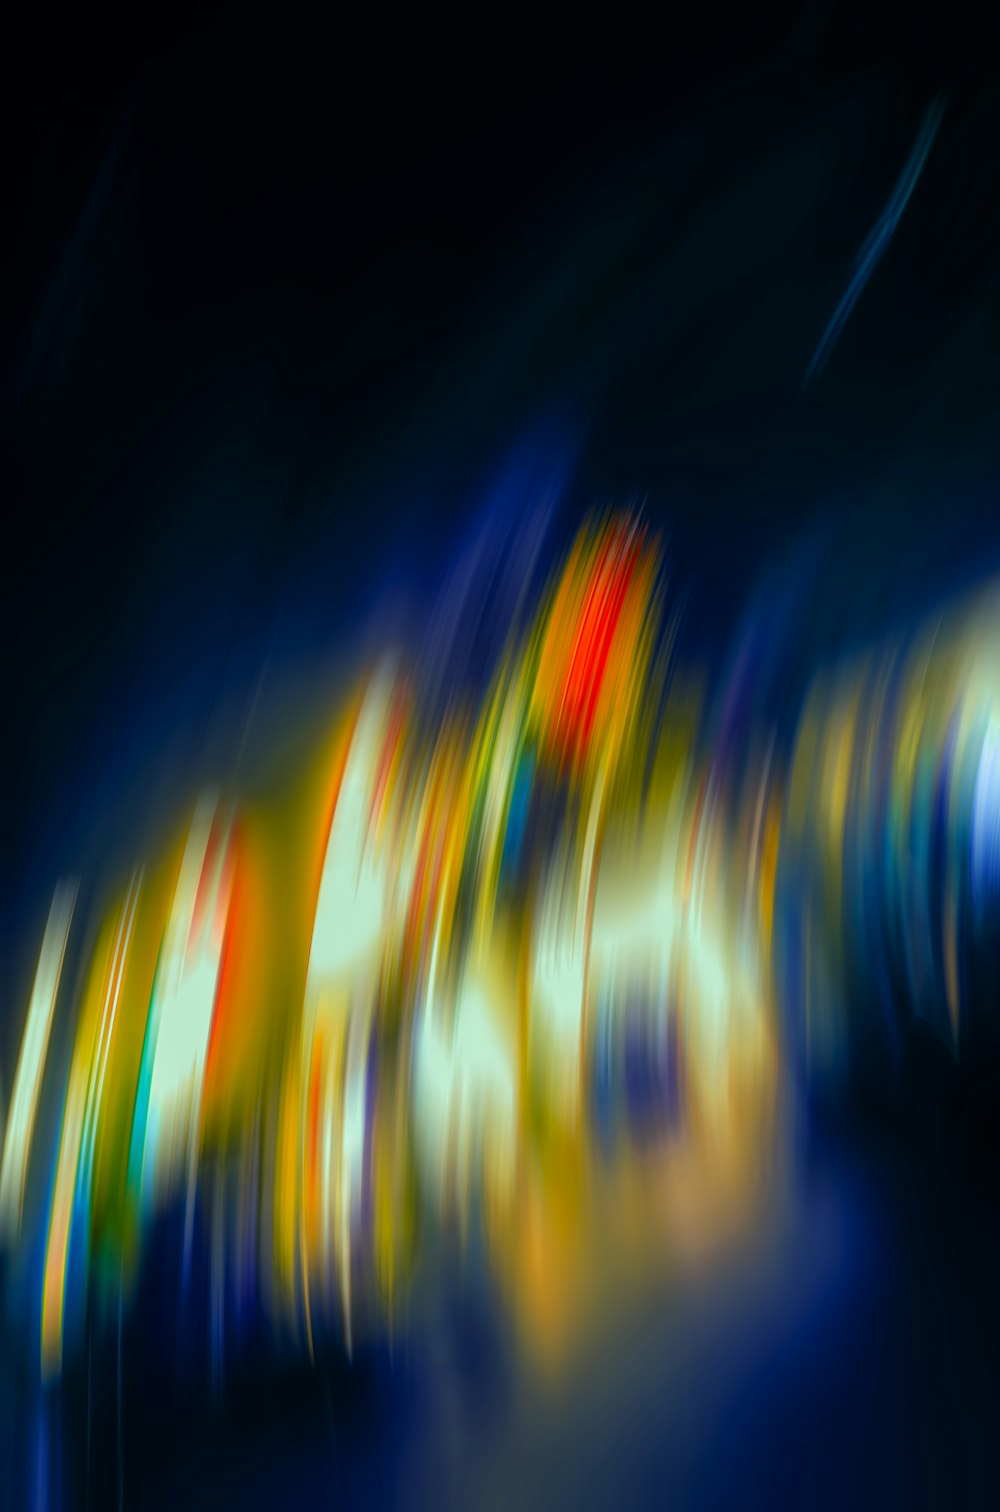 a blurry photo of a colorful object in the dark